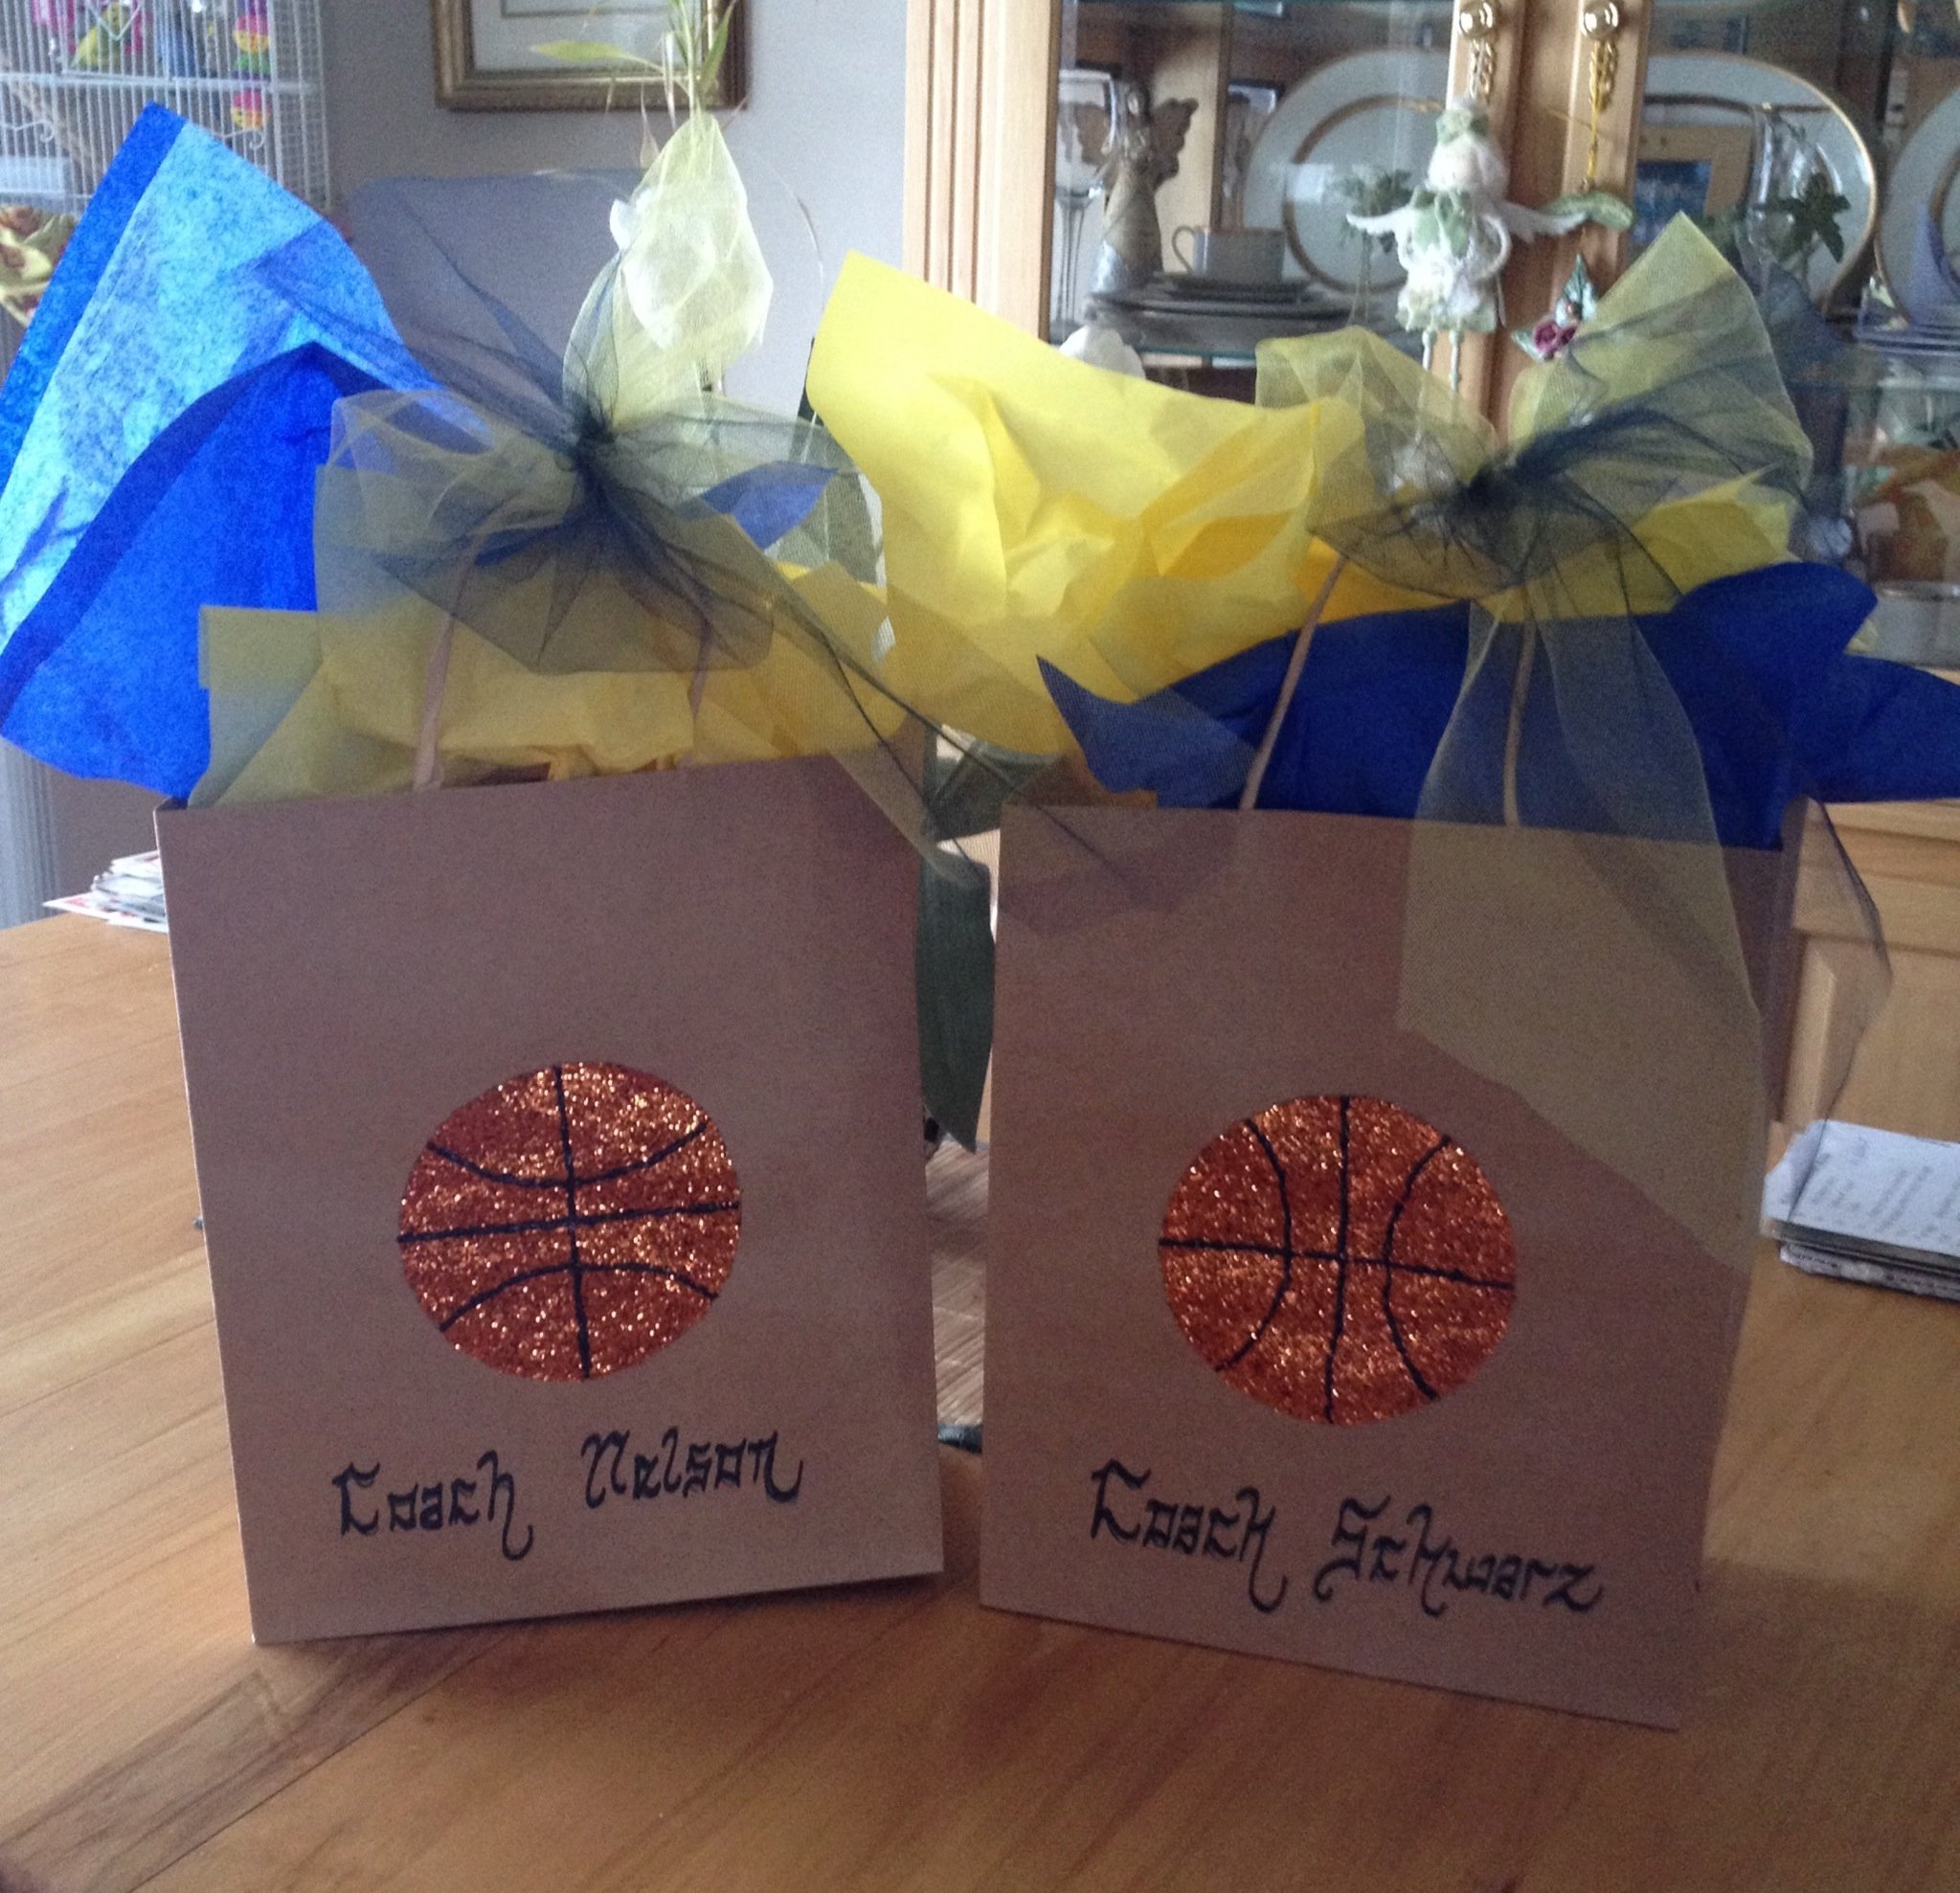 10 Gorgeous Gift Ideas For Basketball Players basketball coach gifts basketball ideas pinterest coach gifts 1 2022